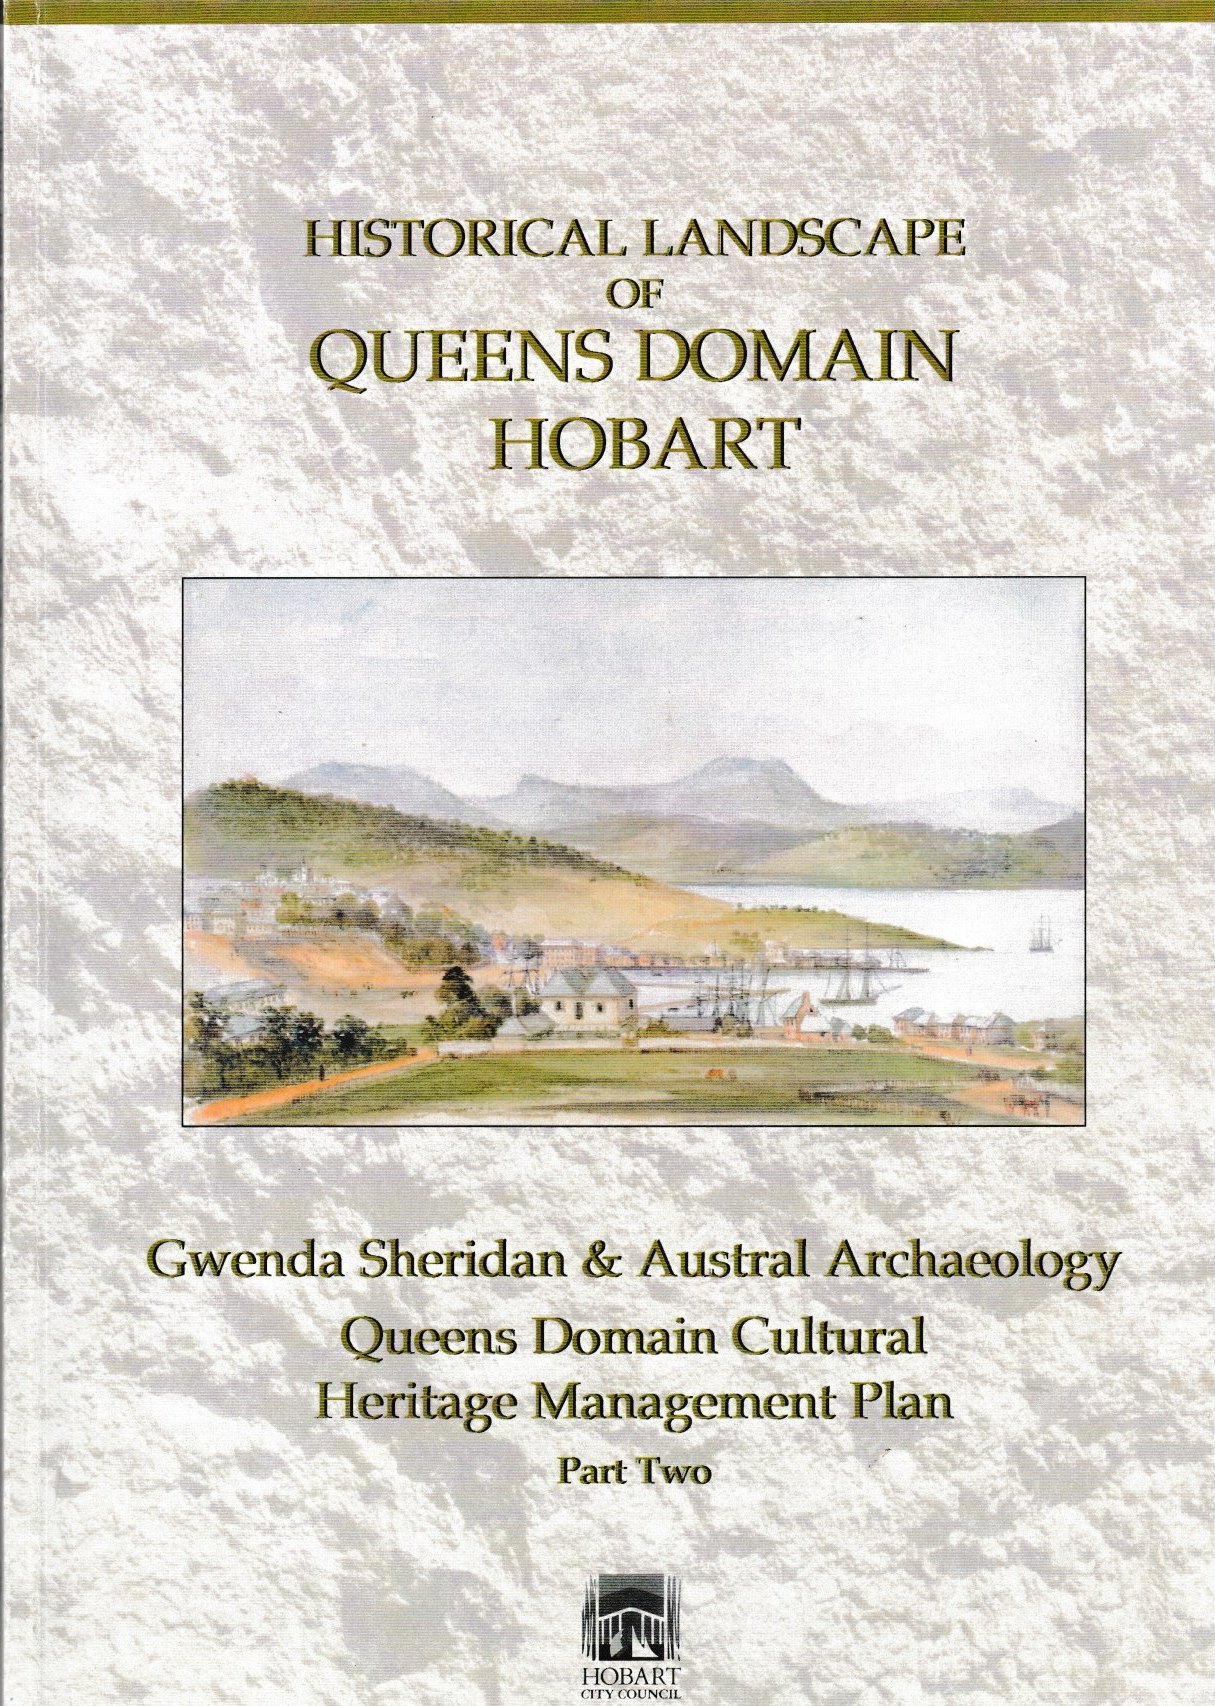 Historical Landscape of Queens Domain, Hobart - Part Two